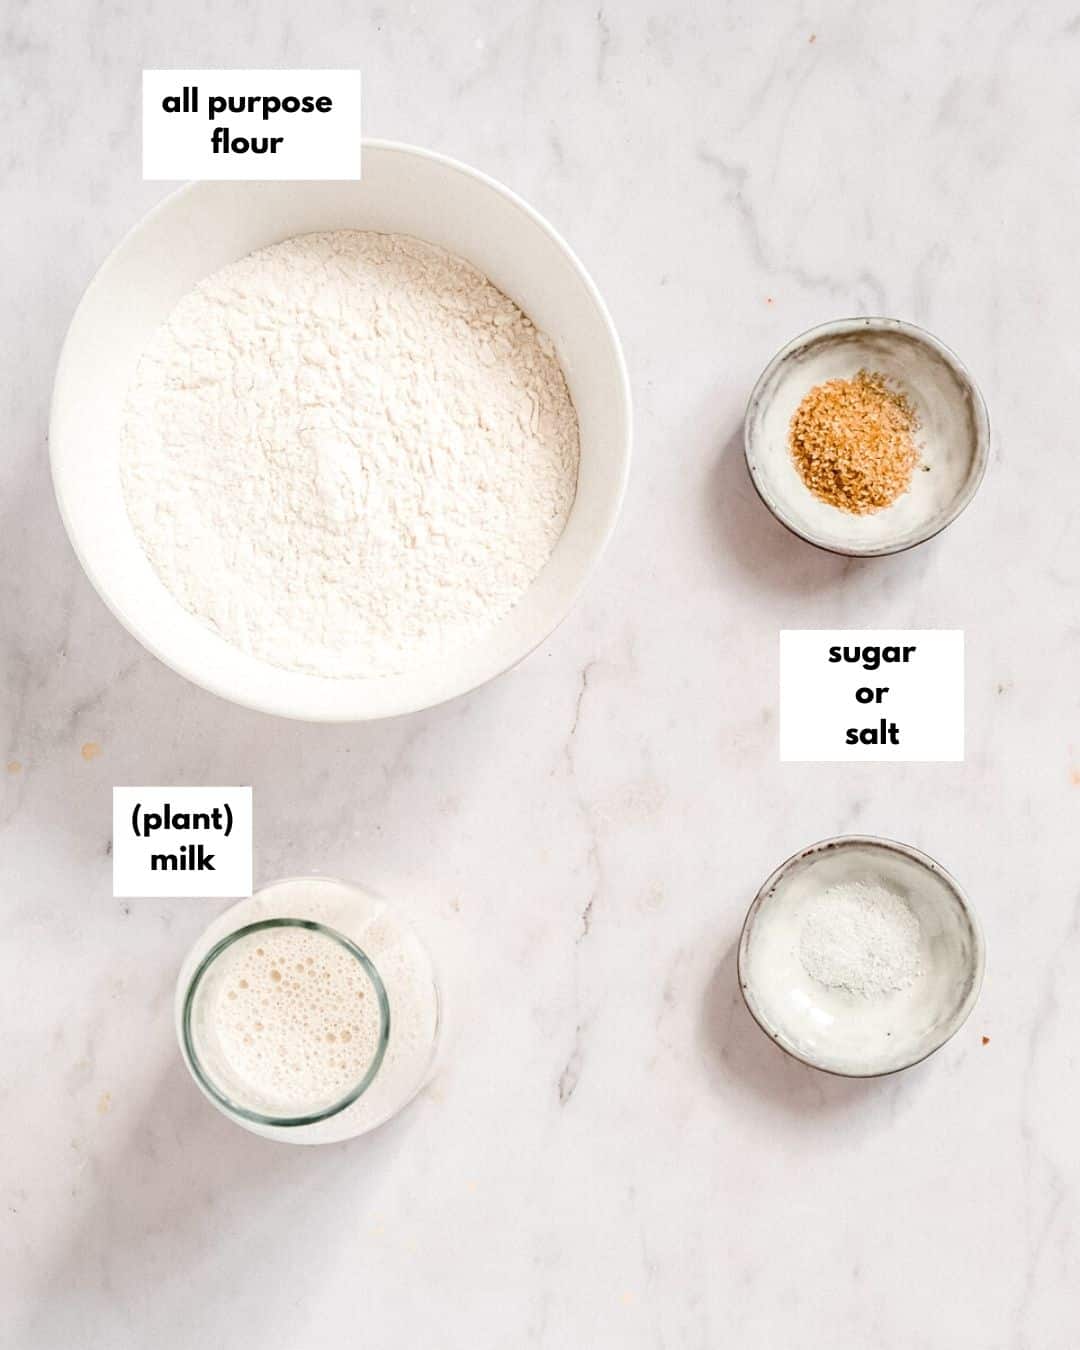 all ingredients needed to make 3 ingredient crepes.